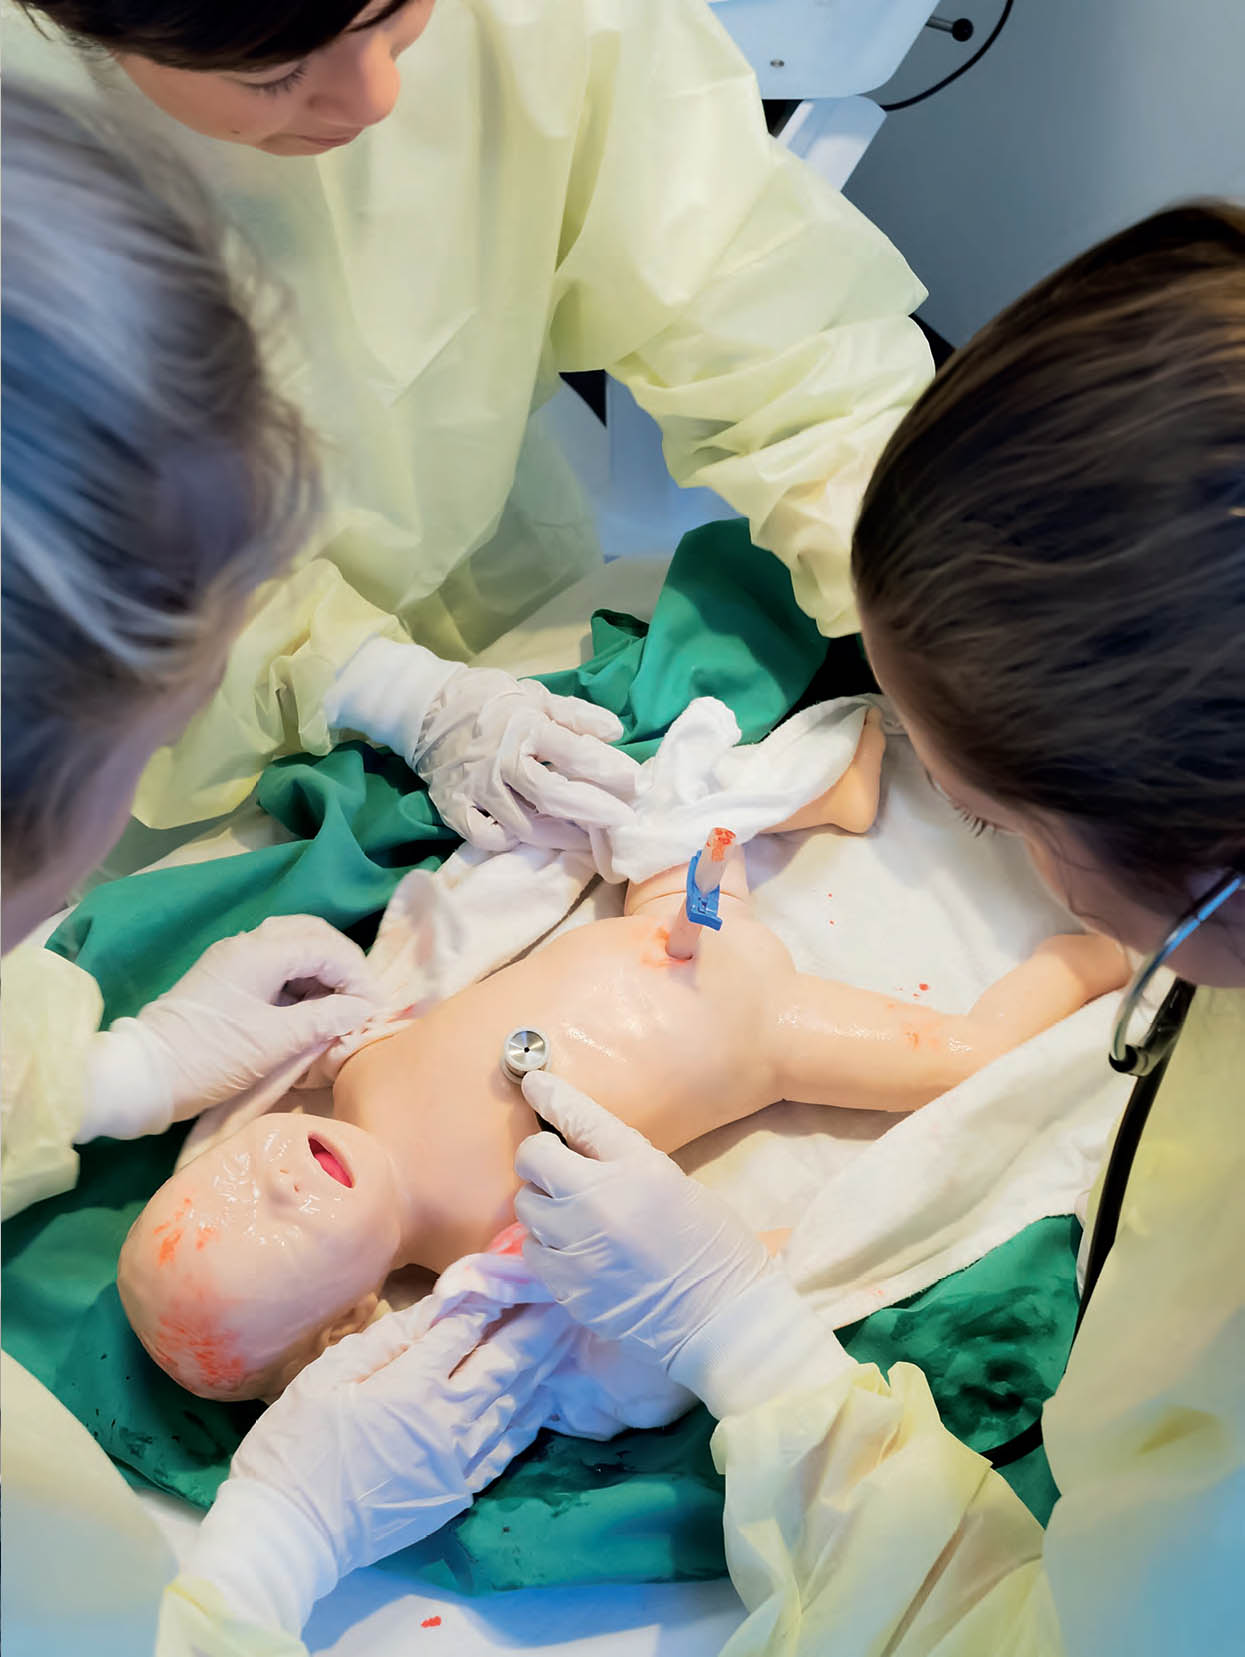 SimNewB, one of several newborn simulators developed in collaboration with representatives of the AAP newborn resuscitation committee.